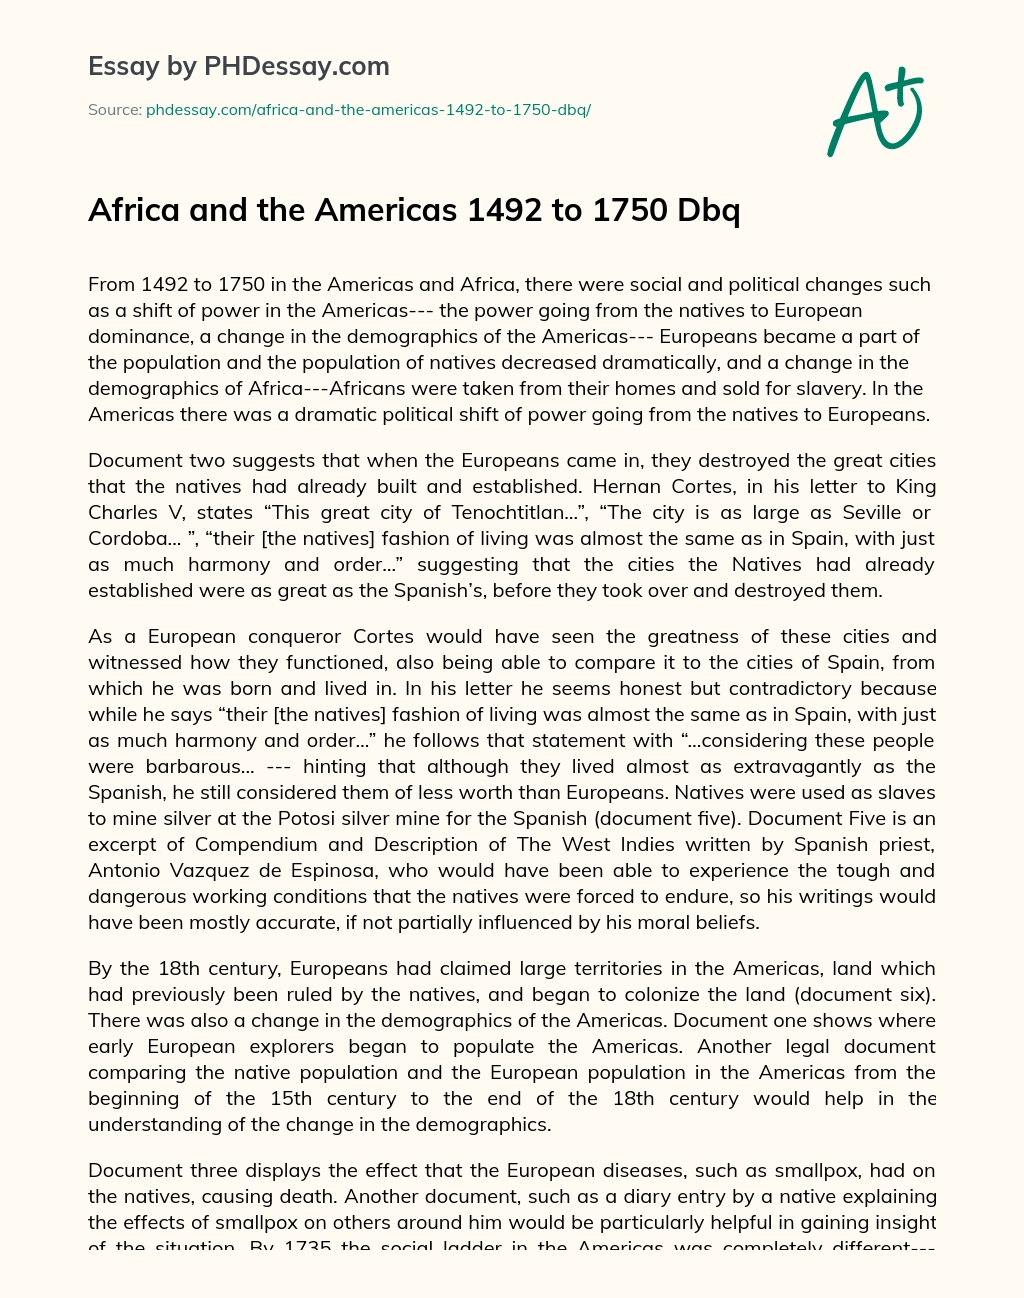 Africa and the Americas 1492 to 1750 Dbq essay